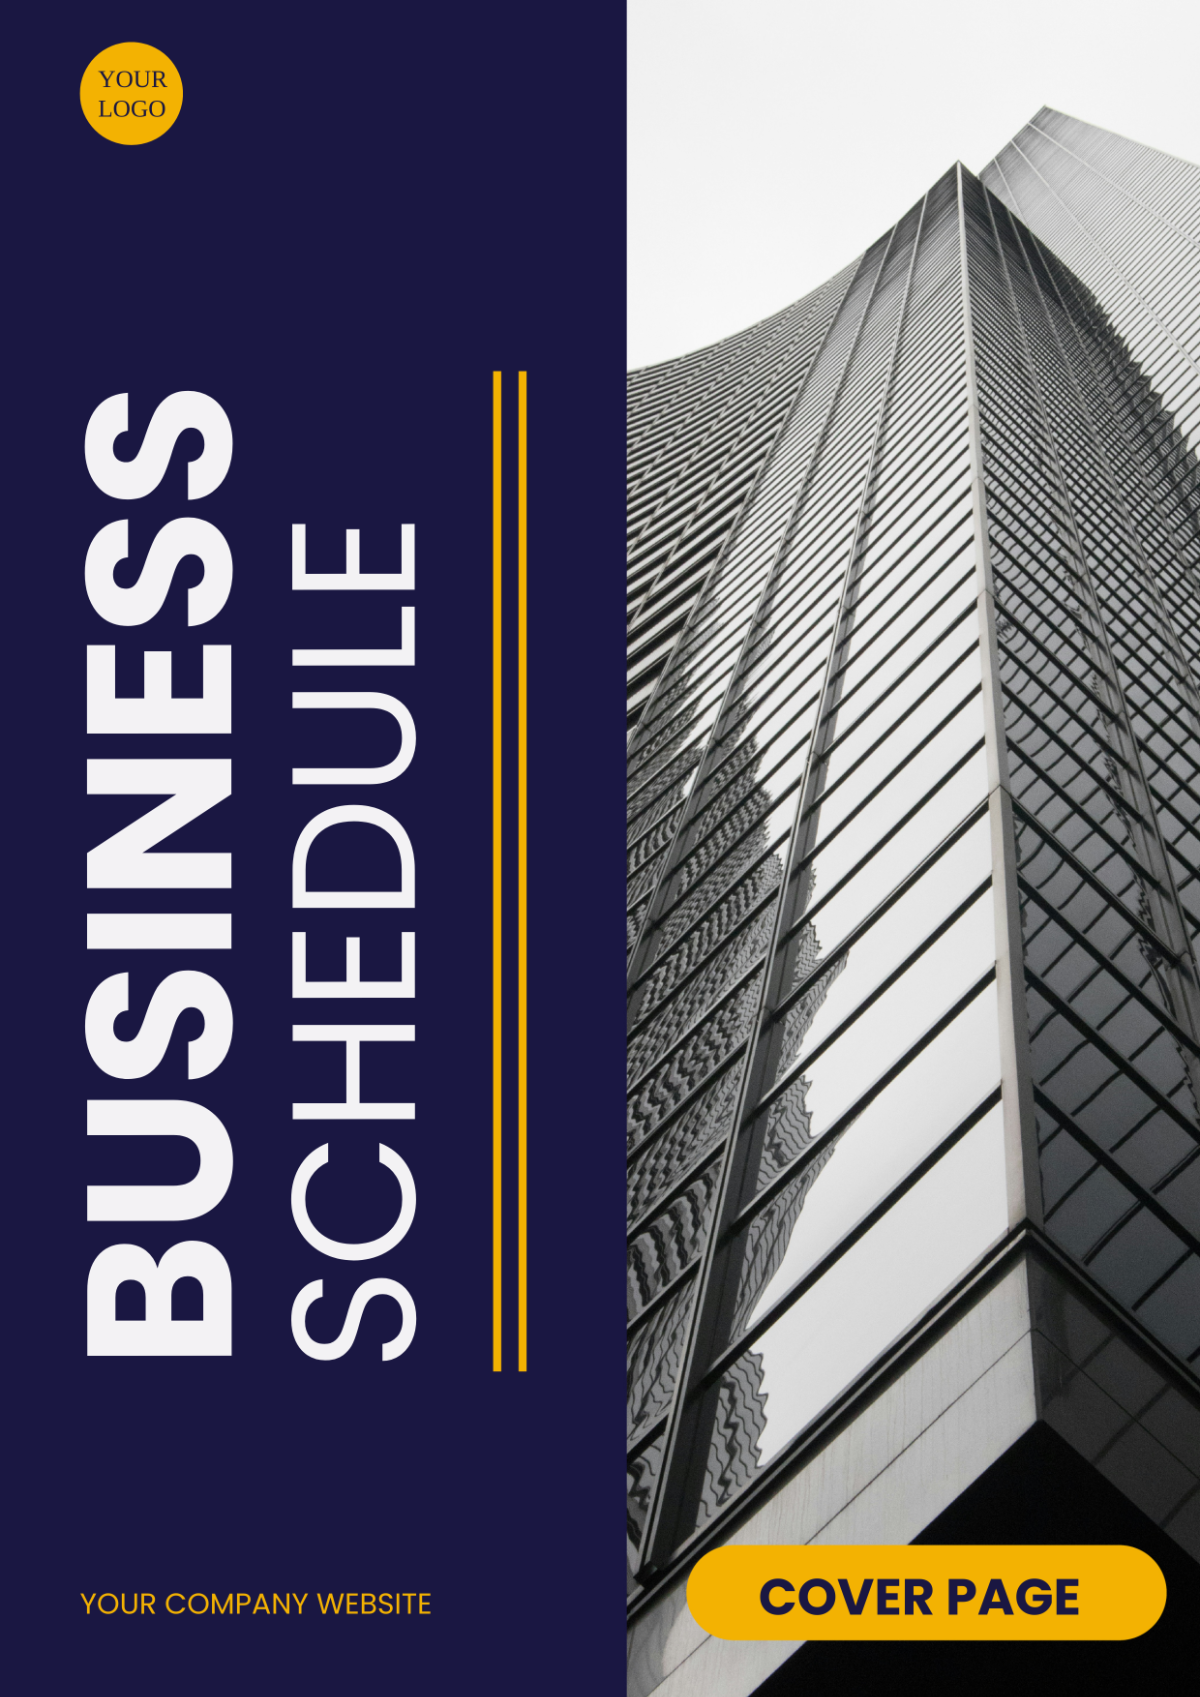 Business Schedule Cover Page